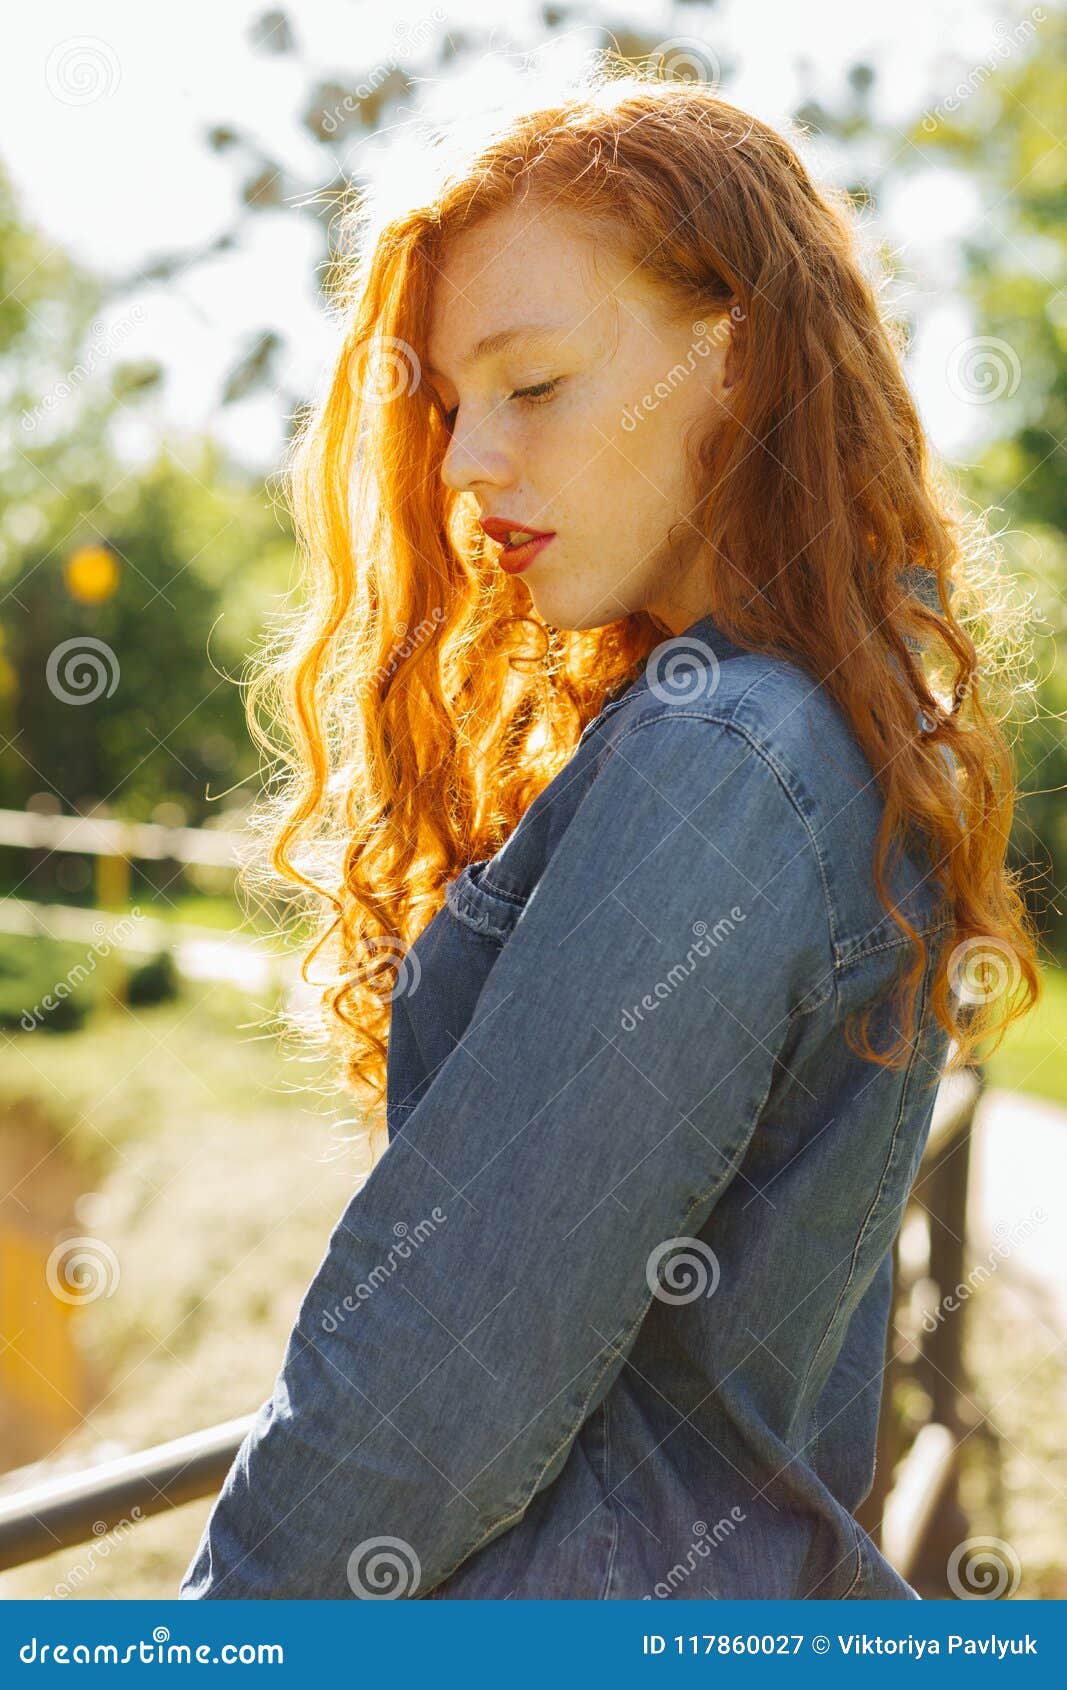 Romantic Redhead Young Woman In Denim Shirt Posing In Rays Of S Stock